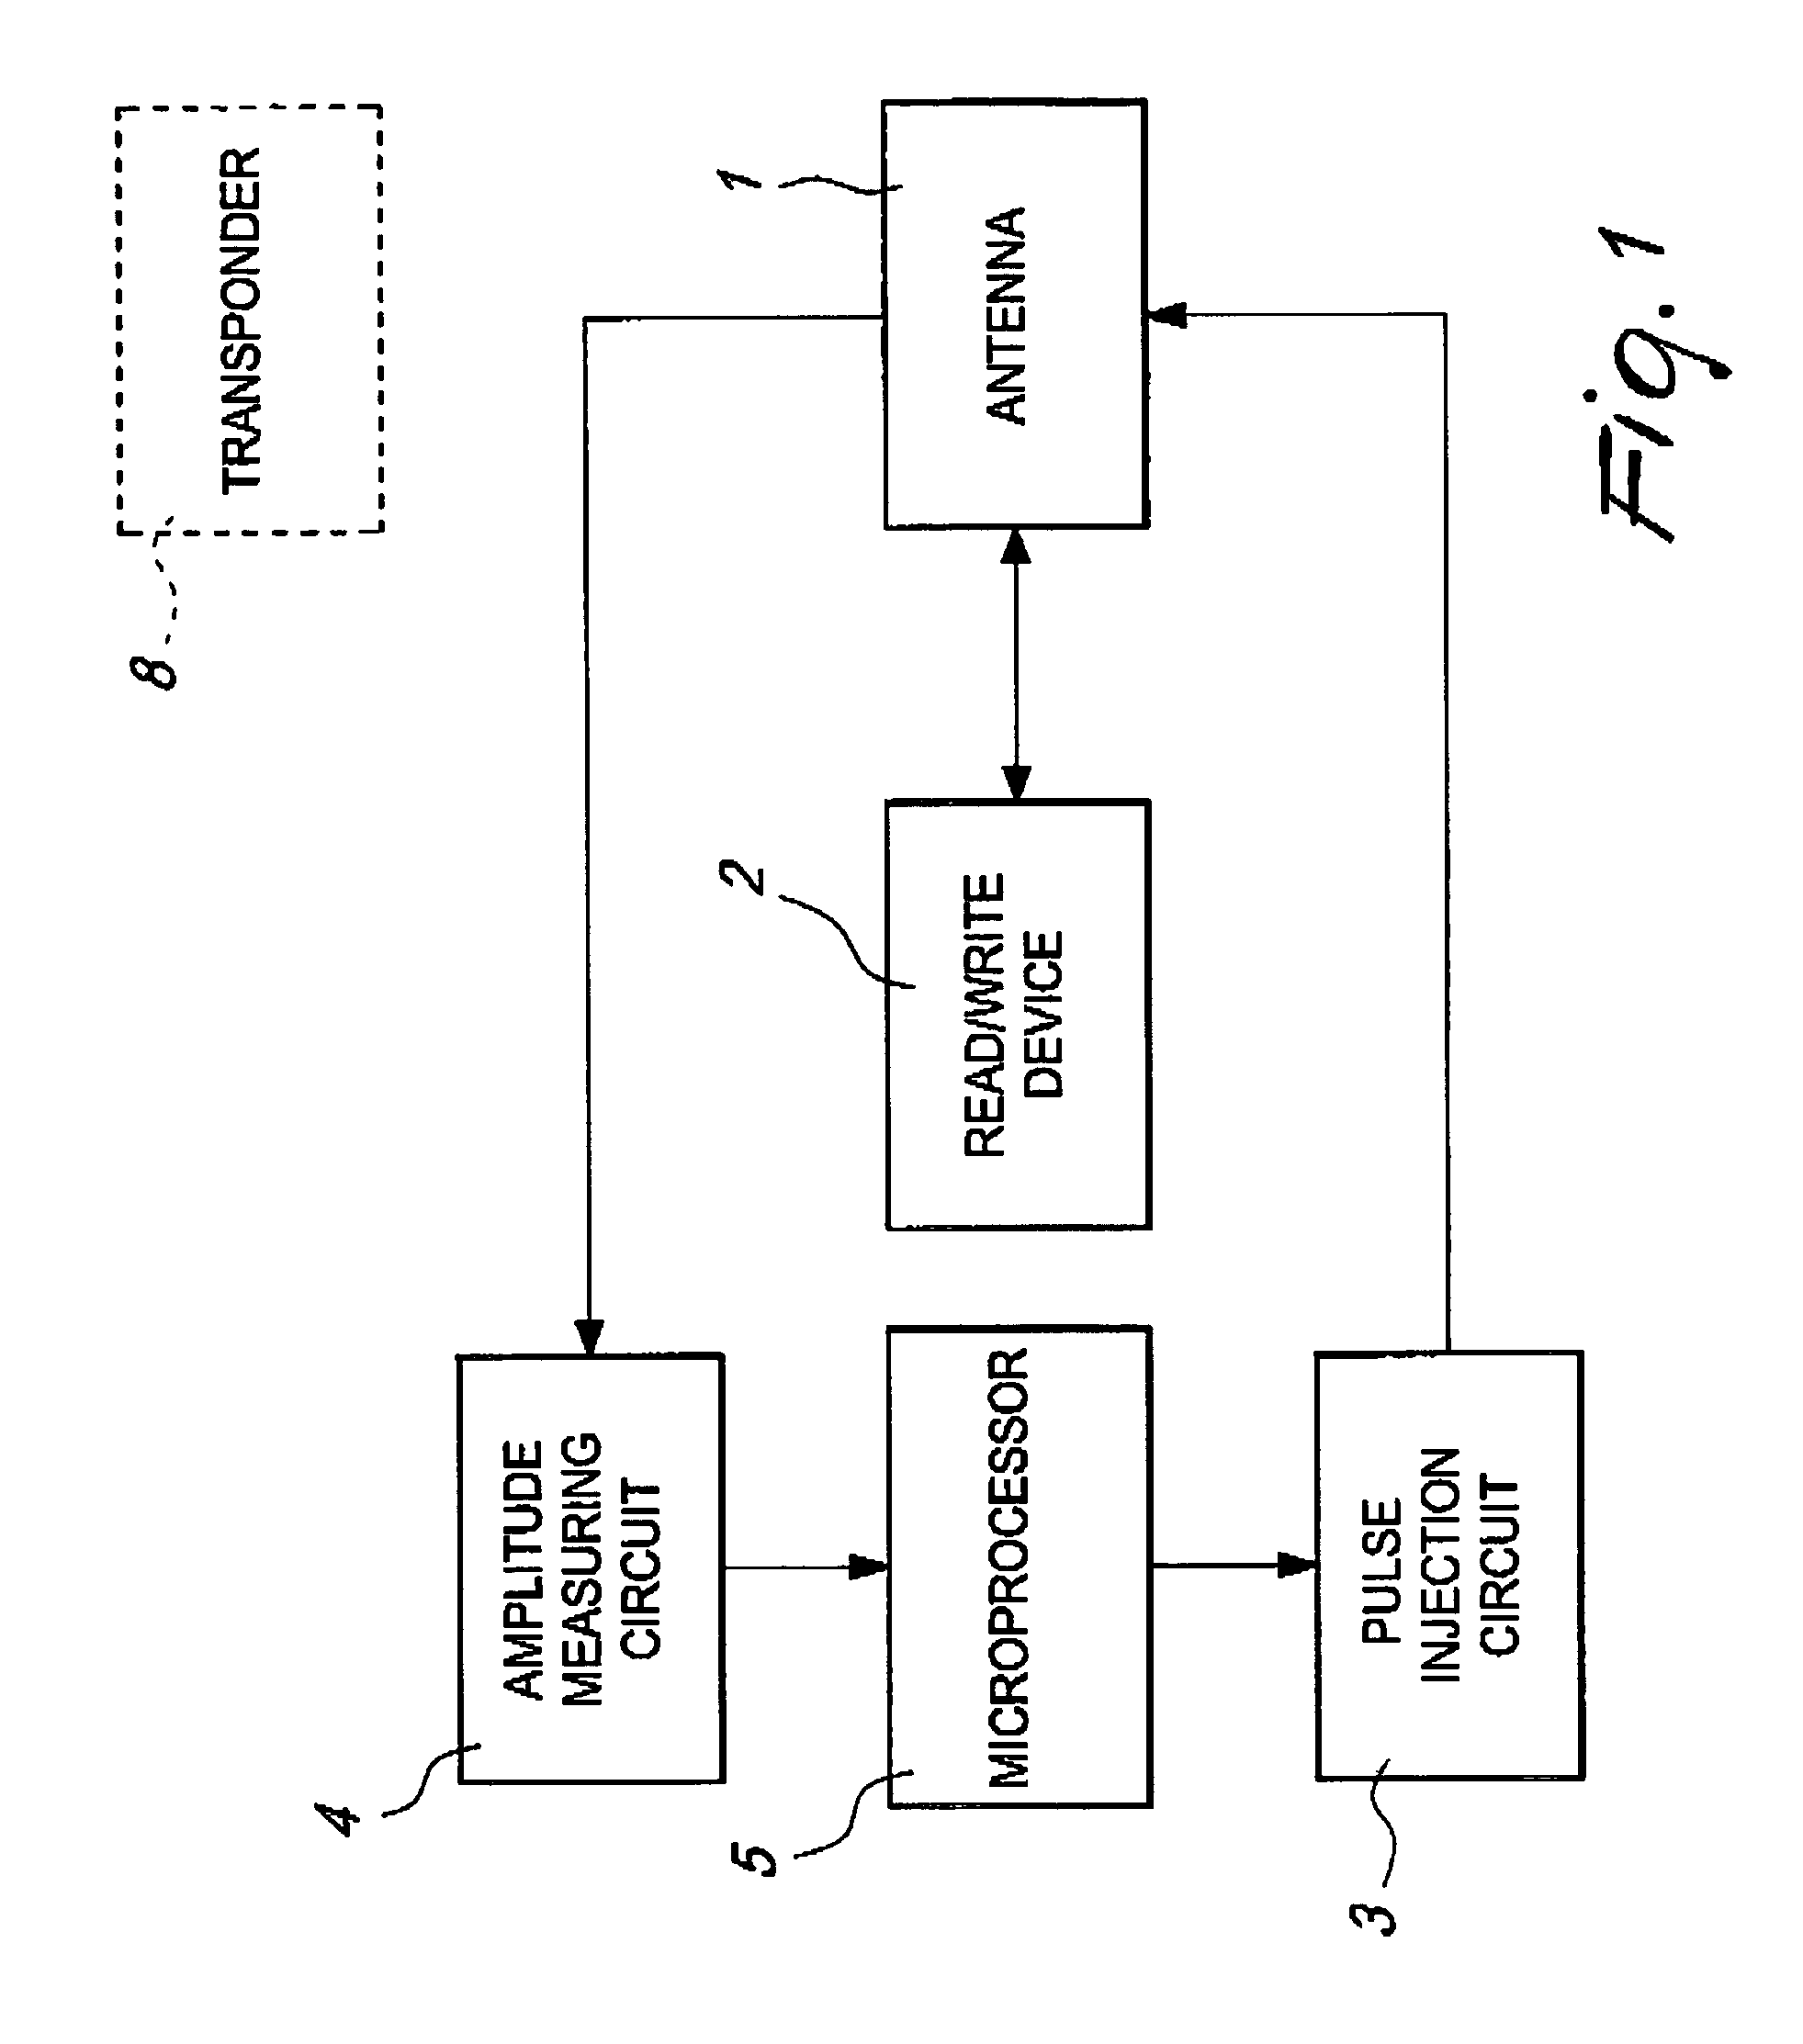 Device for detecting the presence of a transponder around the device